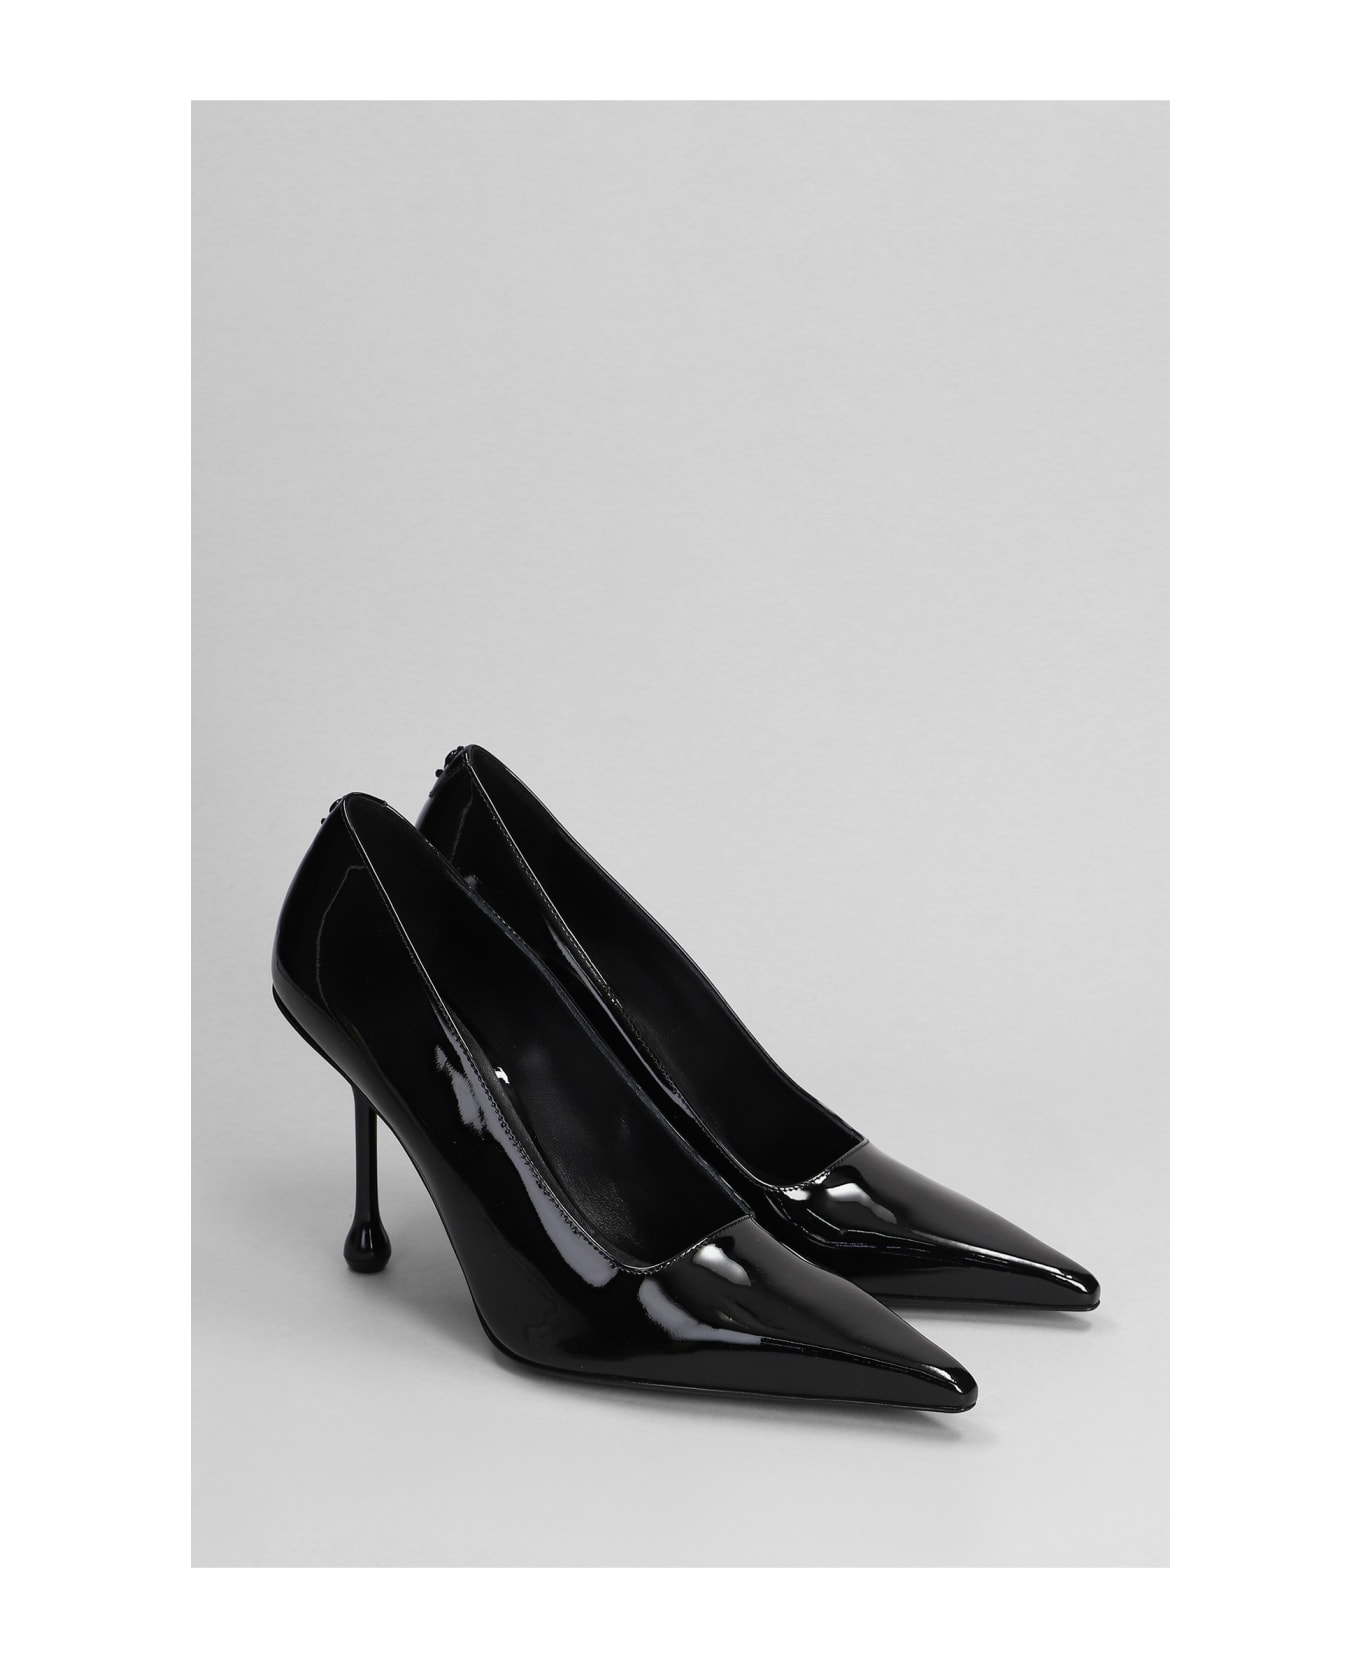 Jimmy Choo Ixia 95 Pumps In Black Patent Leather - black